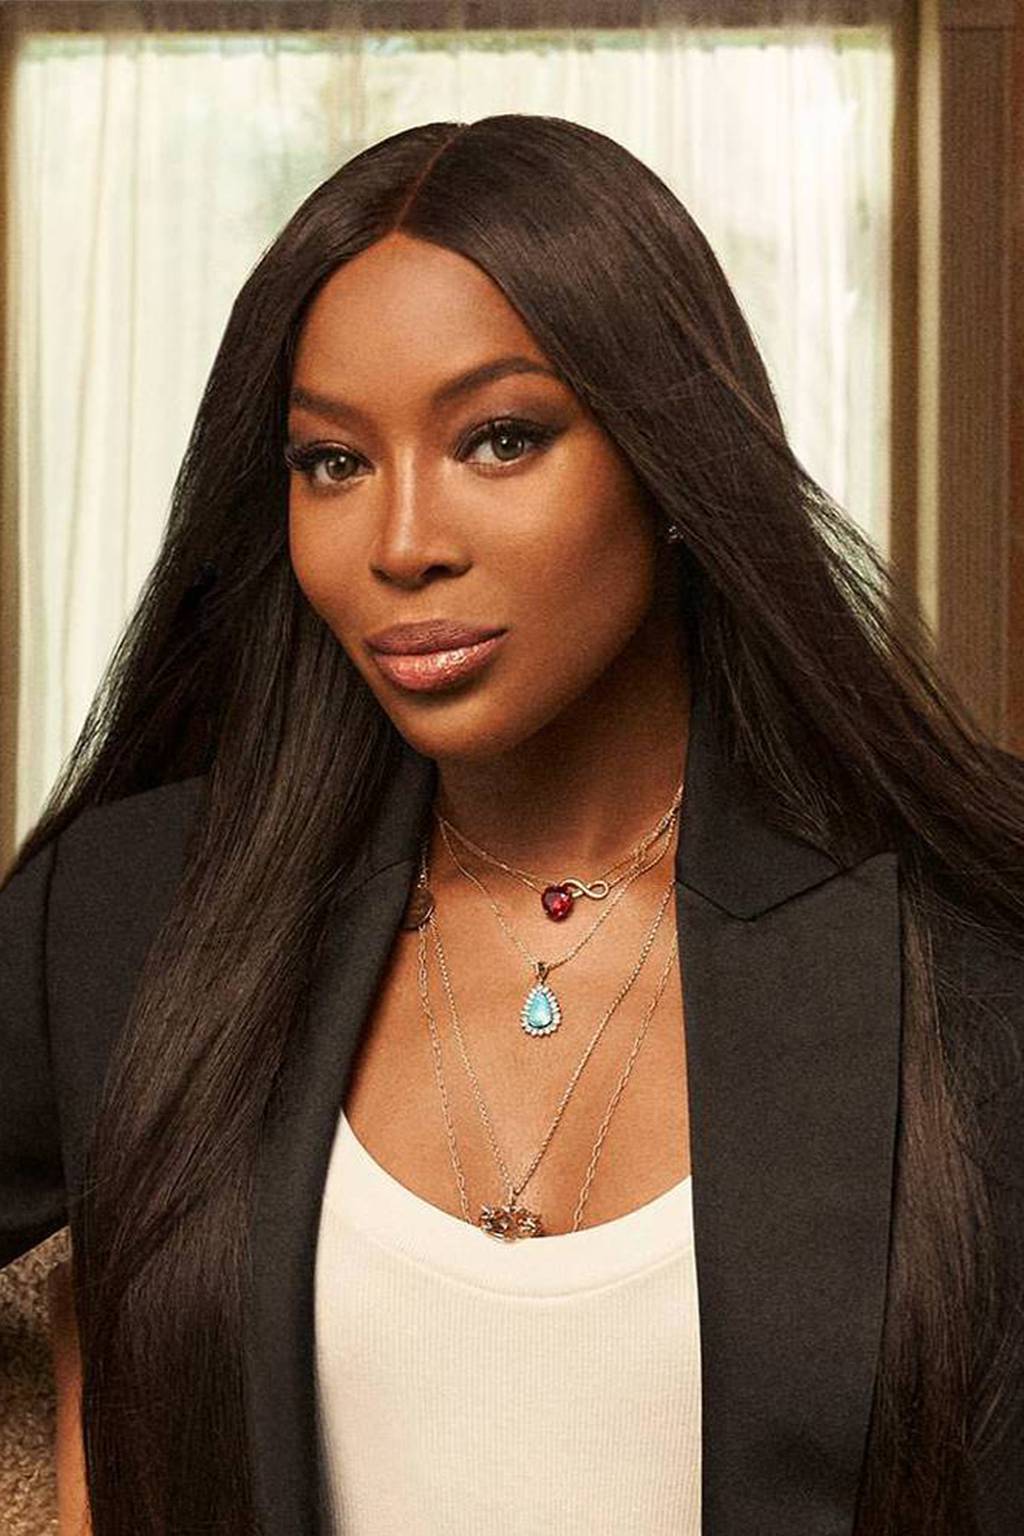 British supermodel Naomi Campbell is teaching a class on modelling fundamentals for the streaming platform, MasterClass.